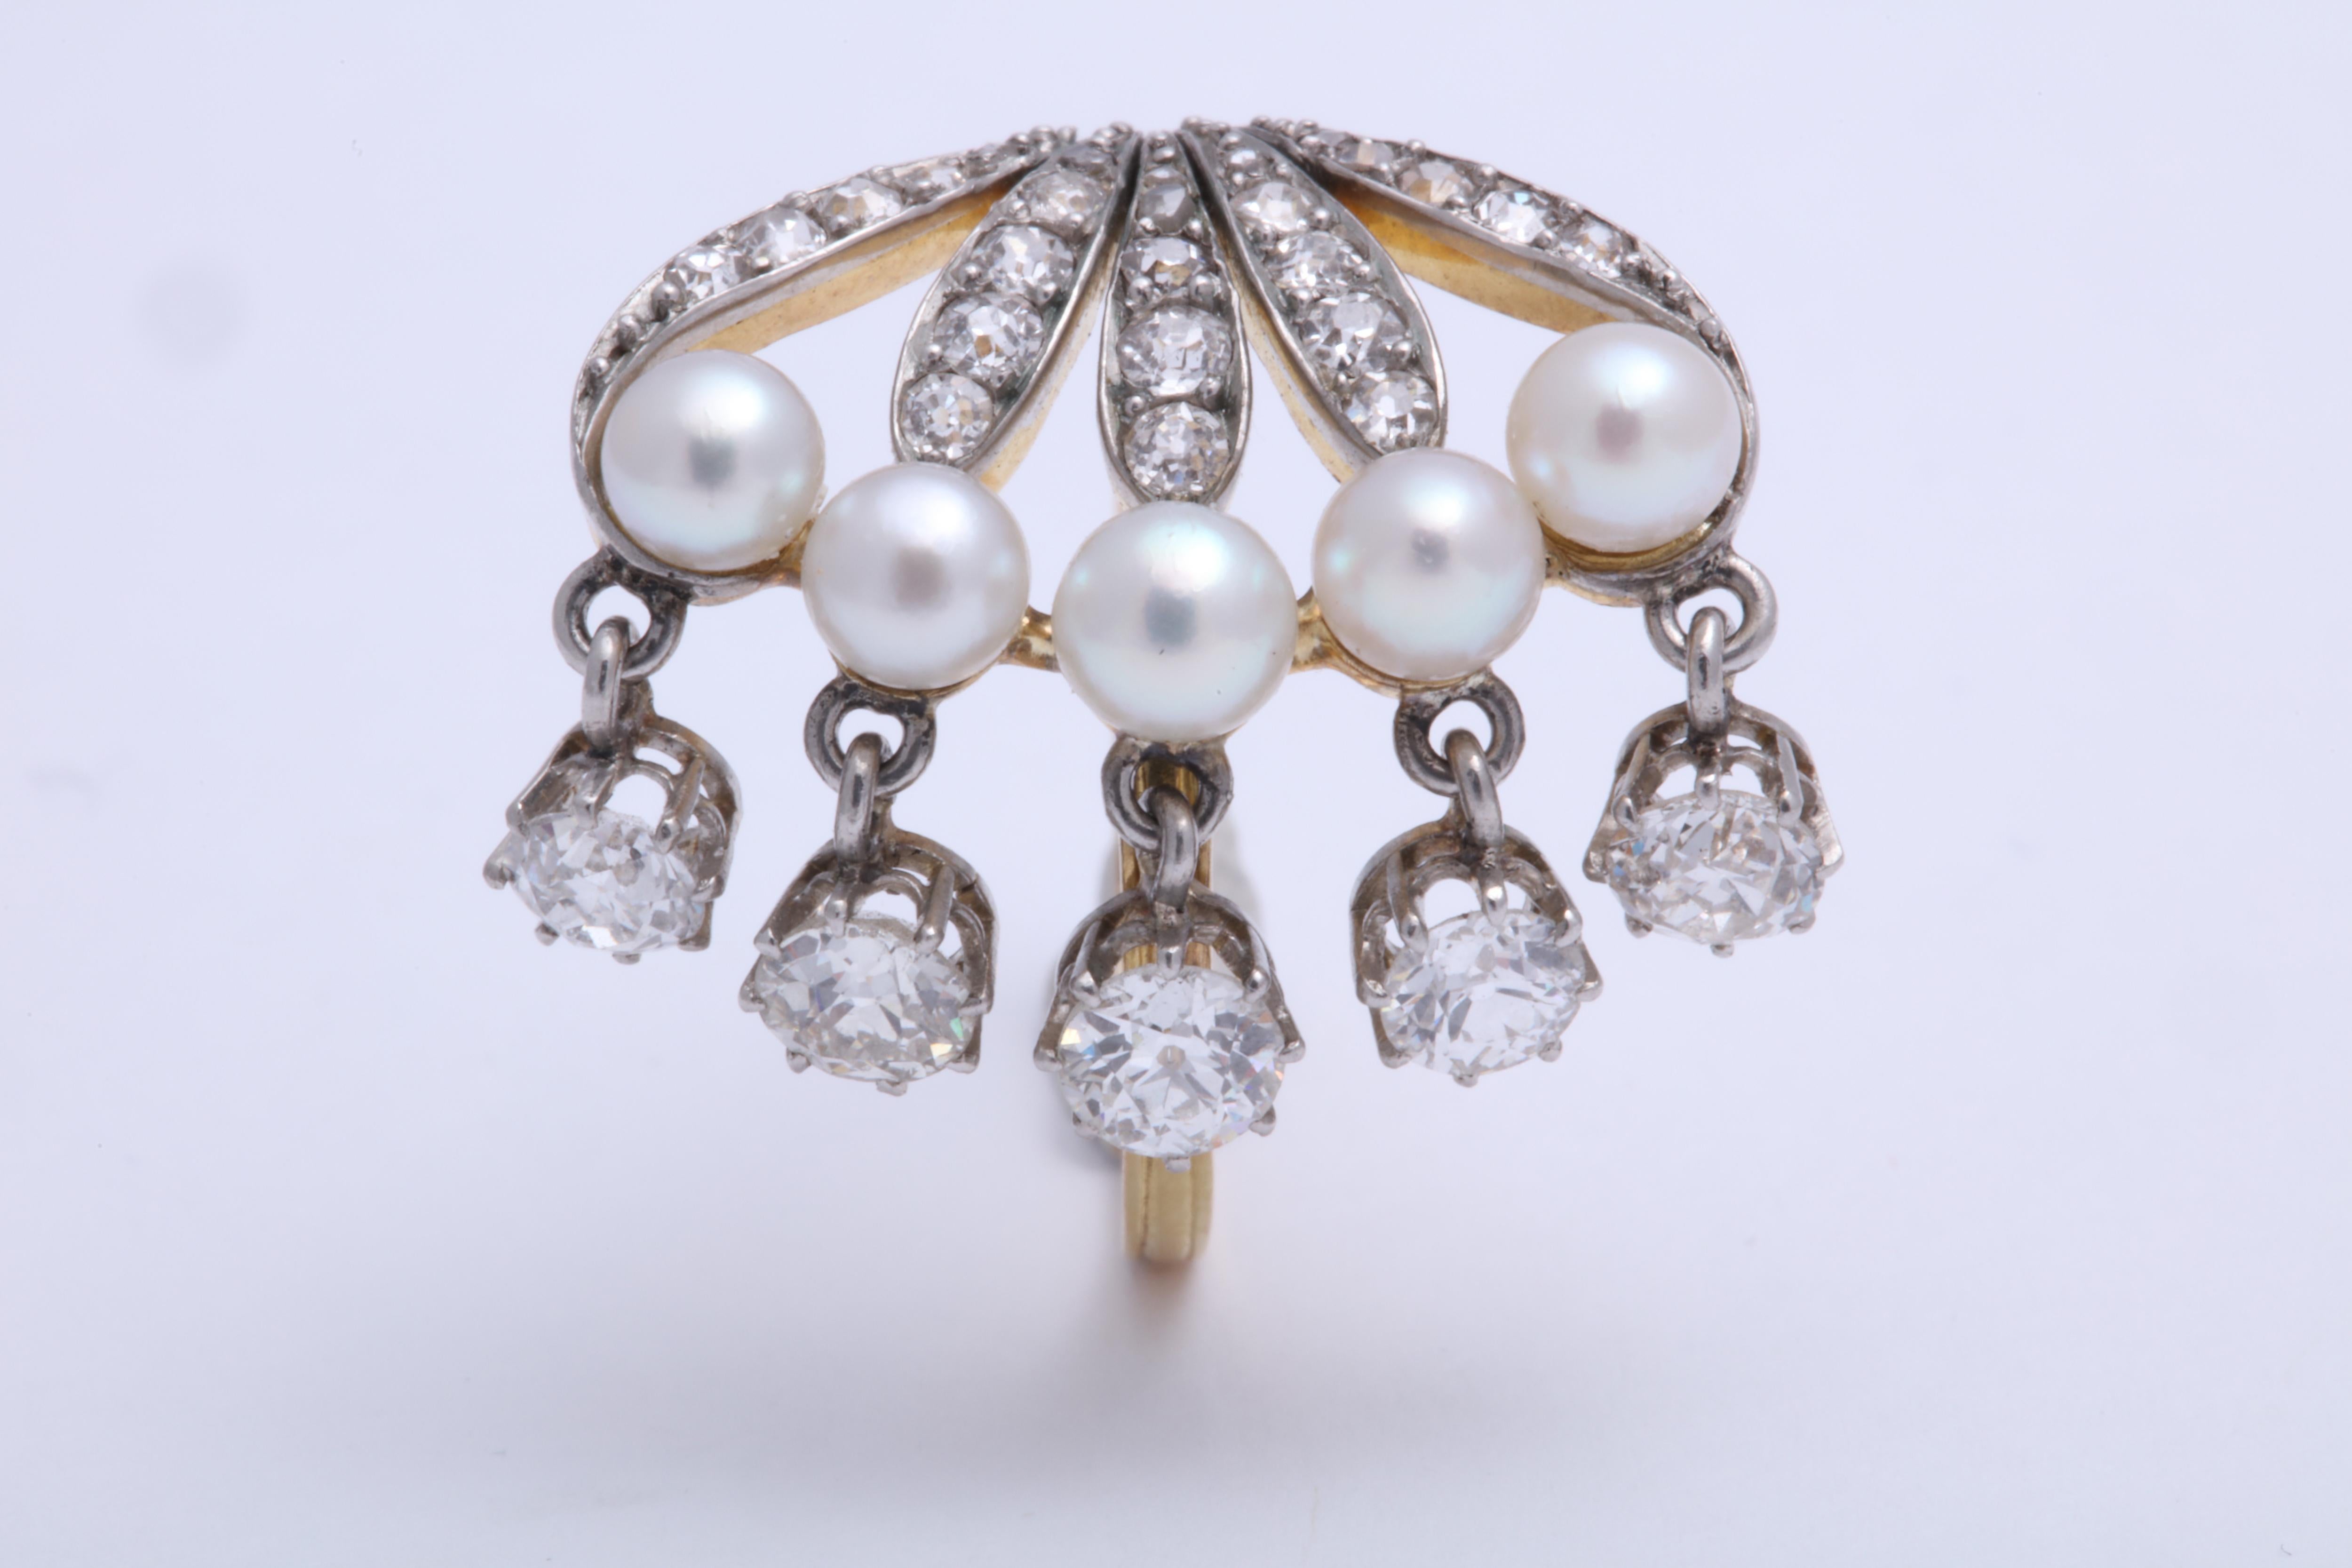 A beautiful and fun Edwardian ring- it looks great on! 5 seed pearls with approximately 1.35 total carats of diamonds both set into the mount and dangling. The ring is platinum on 18K. 